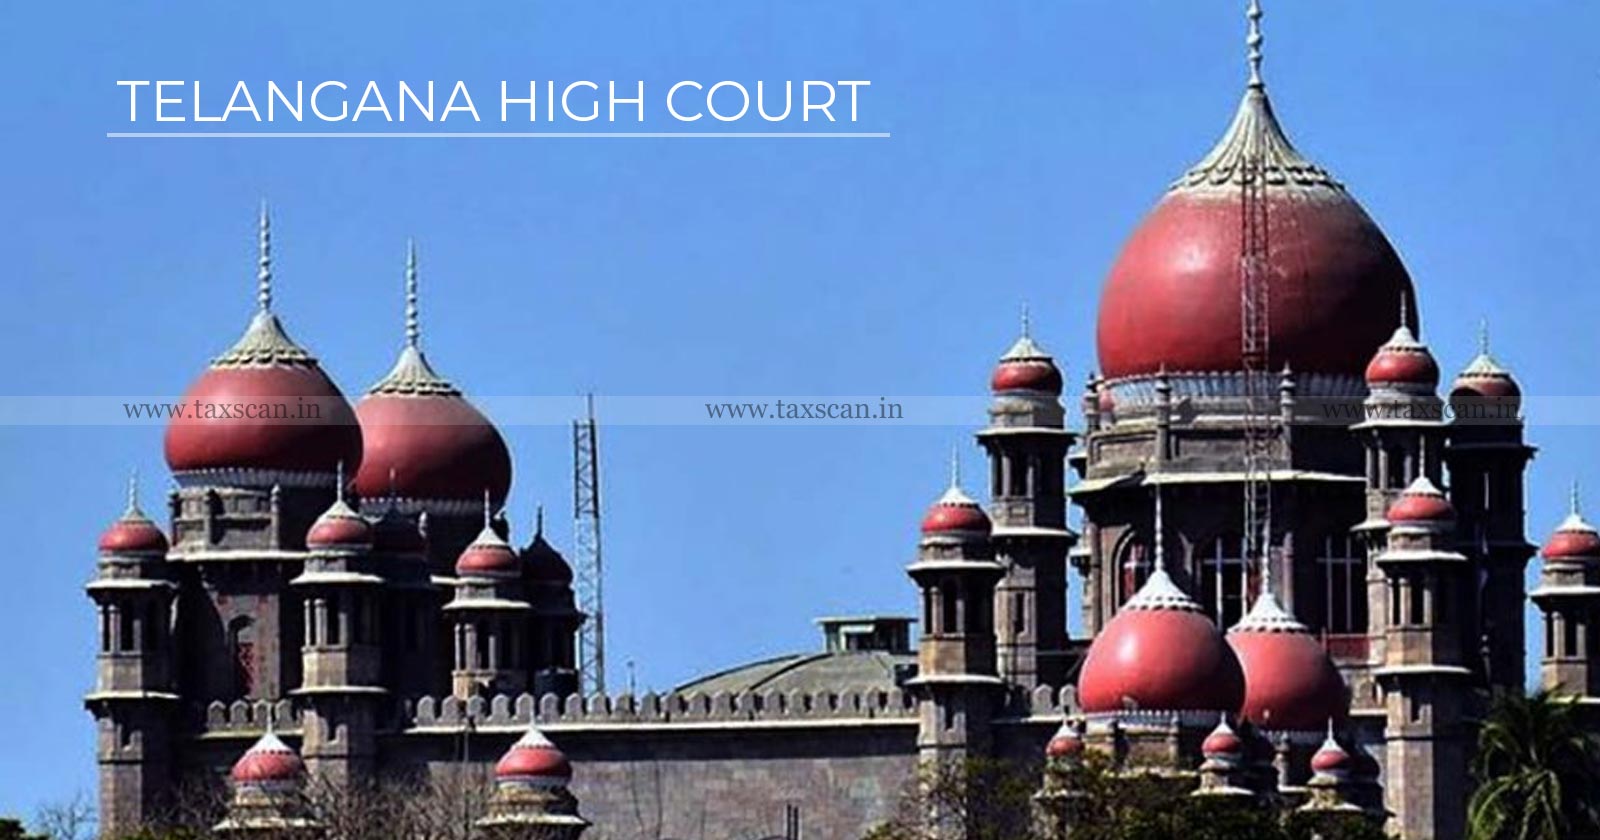 Notice - Personal Hearing - Order - Demand - Finance Act - Telangana High Court - taxscan